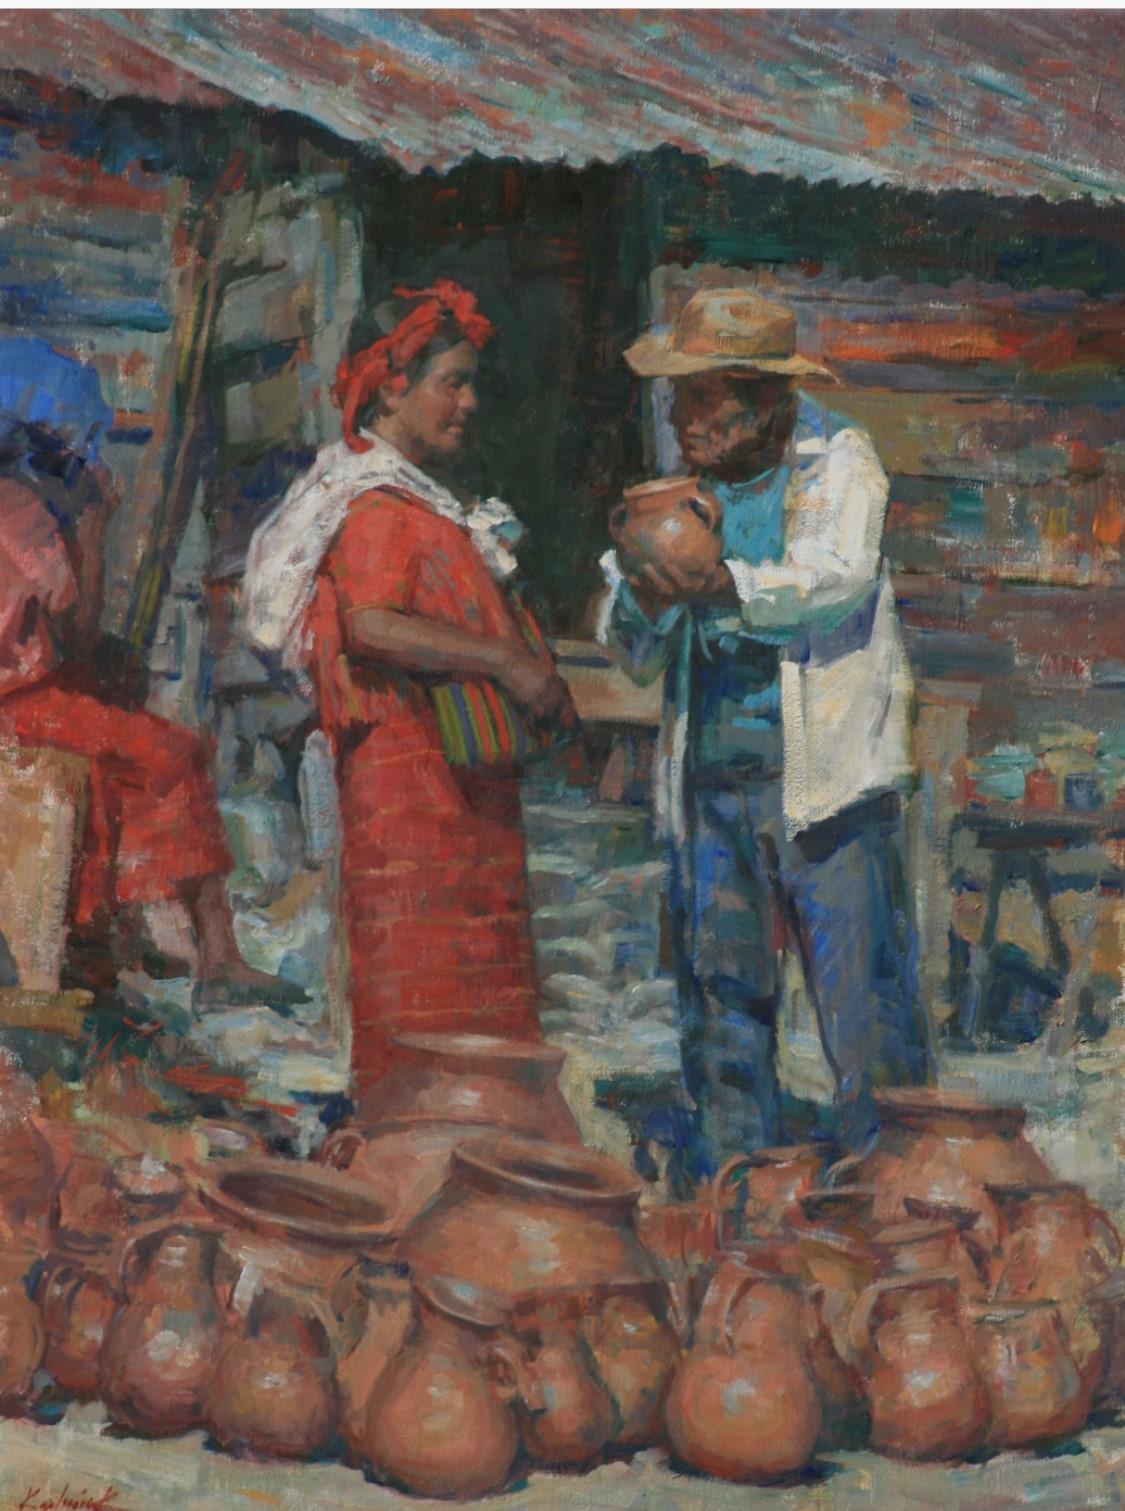 Guatemalan Pottery Market  Women in Huipils  Handmade by Artisans   Culture - Painting by William Kalwick